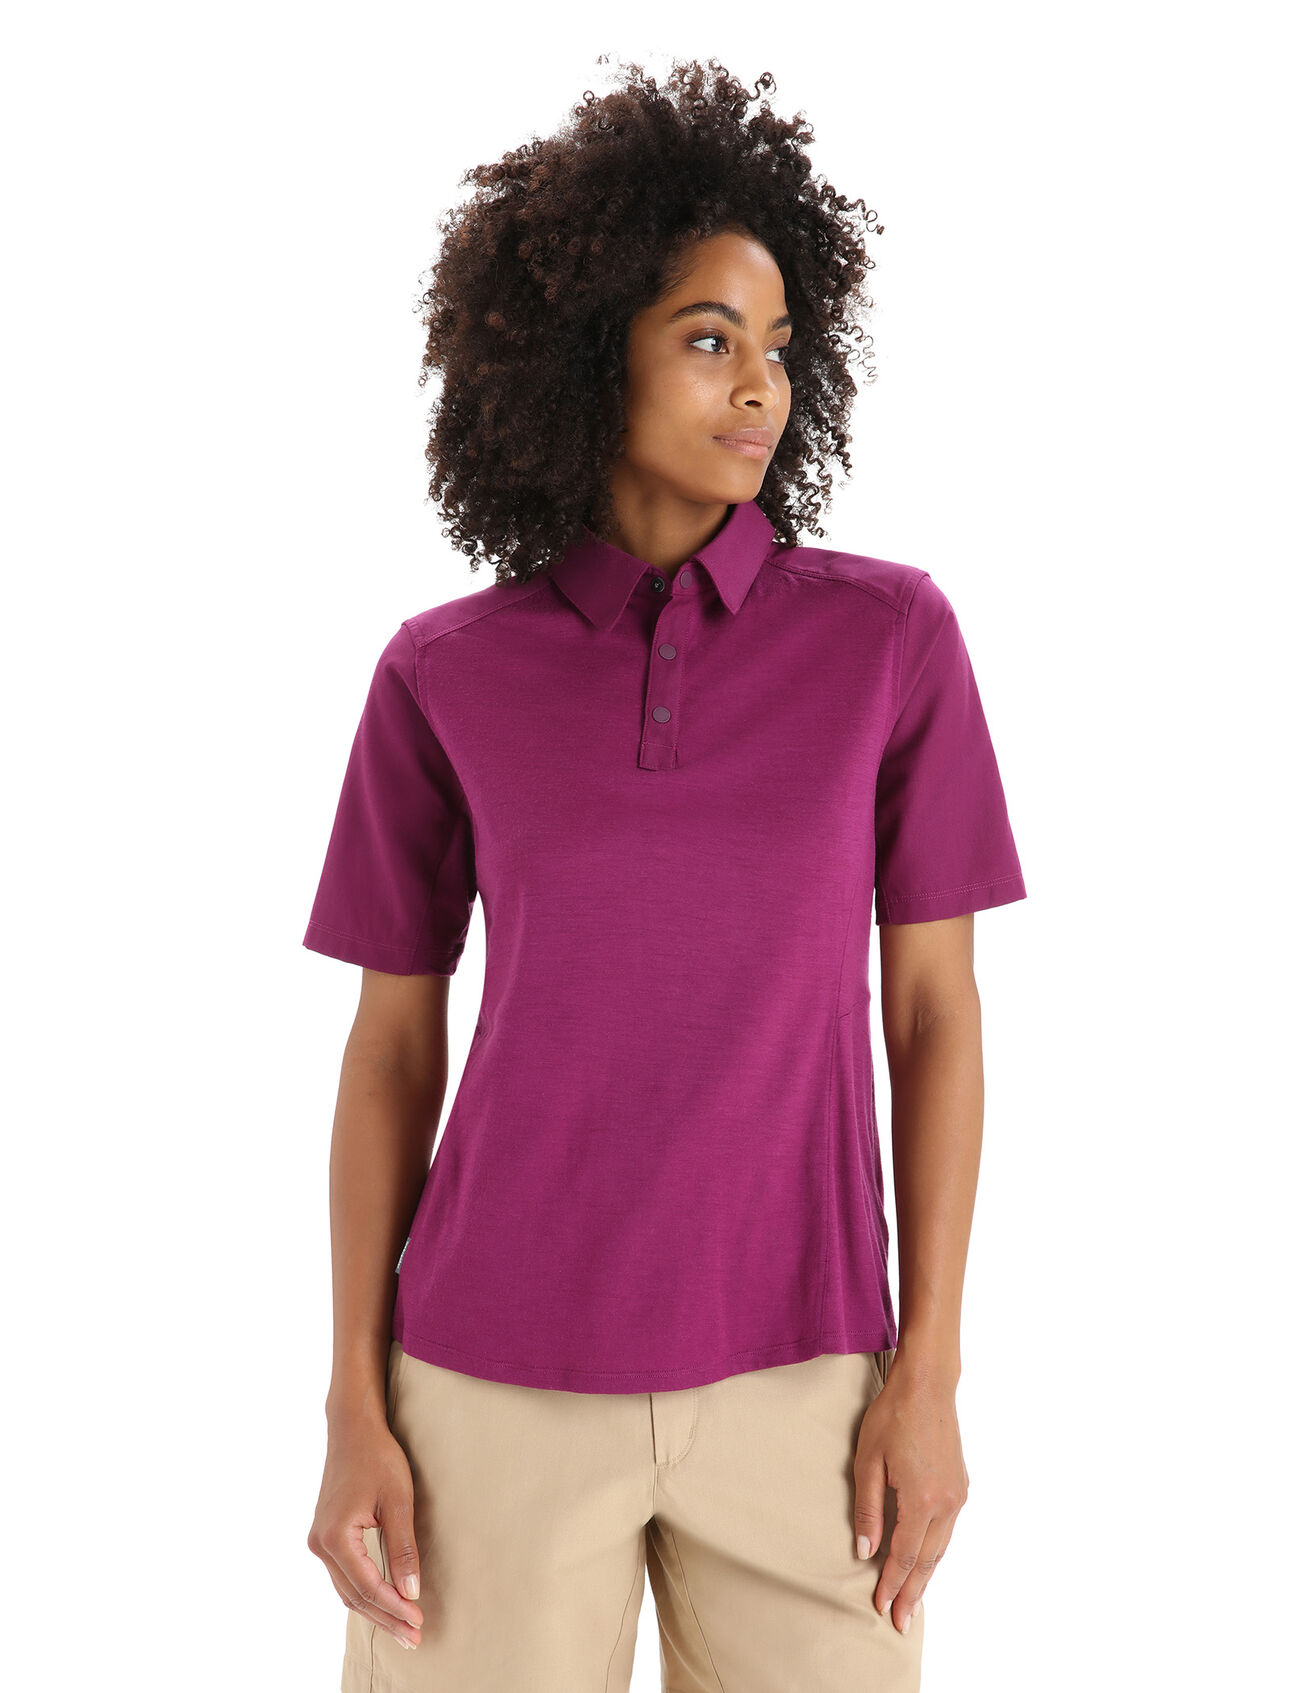 Womens Merino Hike Short Sleeve Top A lightweight and breathable merino shirt ideal for mountain adventures, the Hike Short Sleeve Top also provides the casual style for whatever comes after.